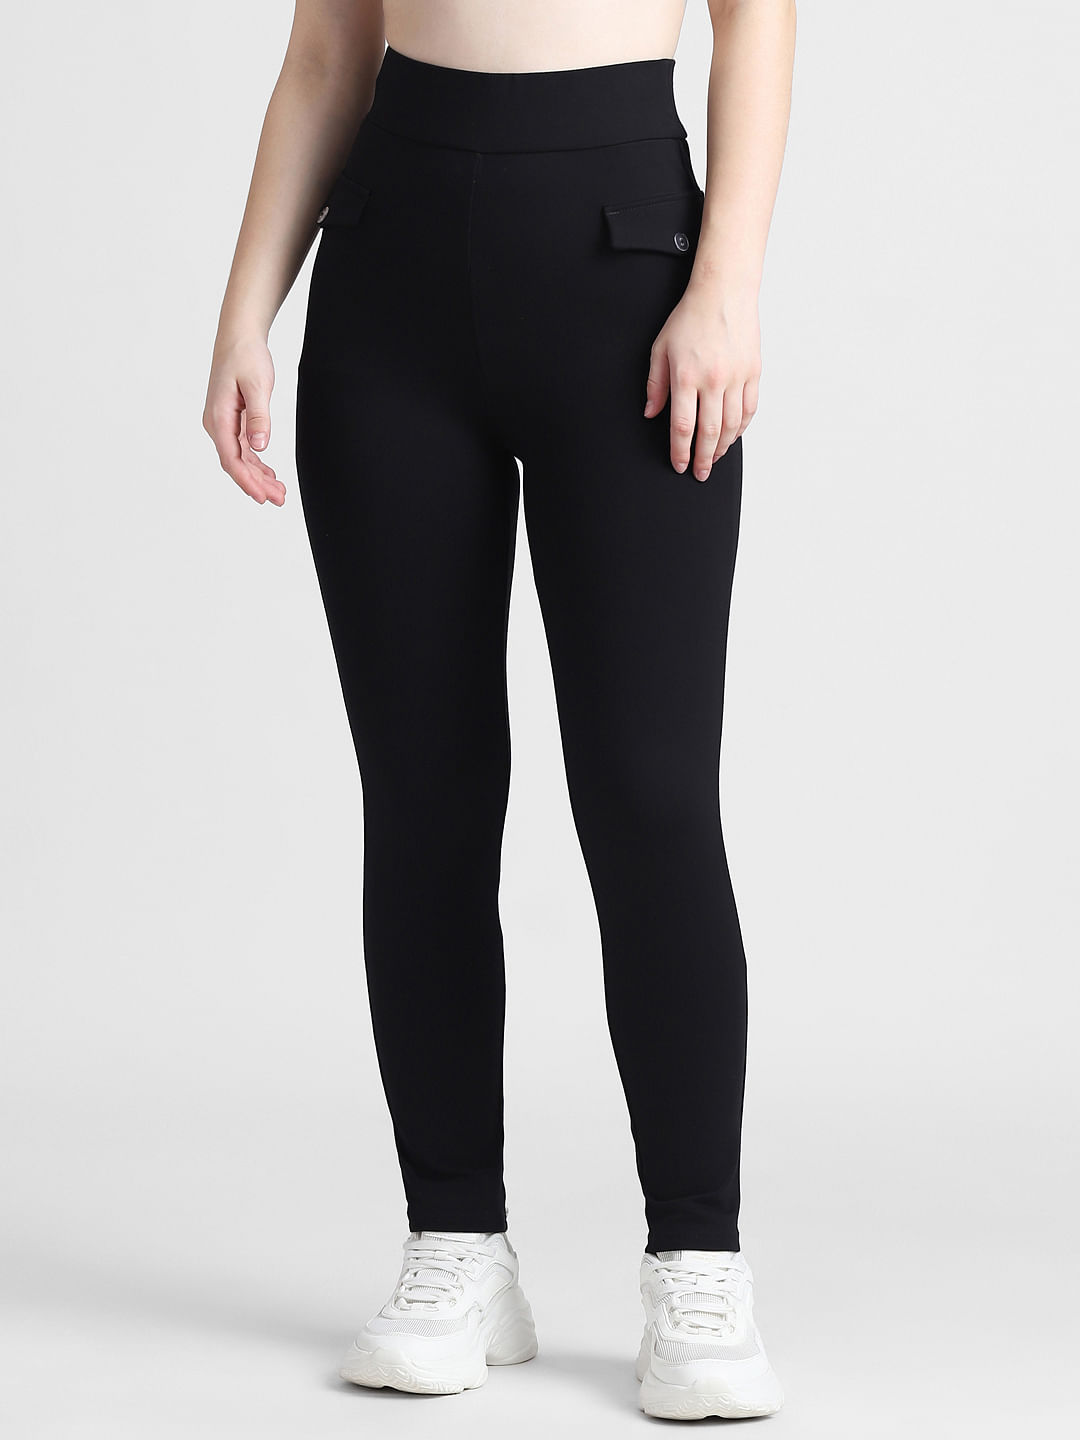 How To Fix Baggy Crotch In Leggings? – solowomen